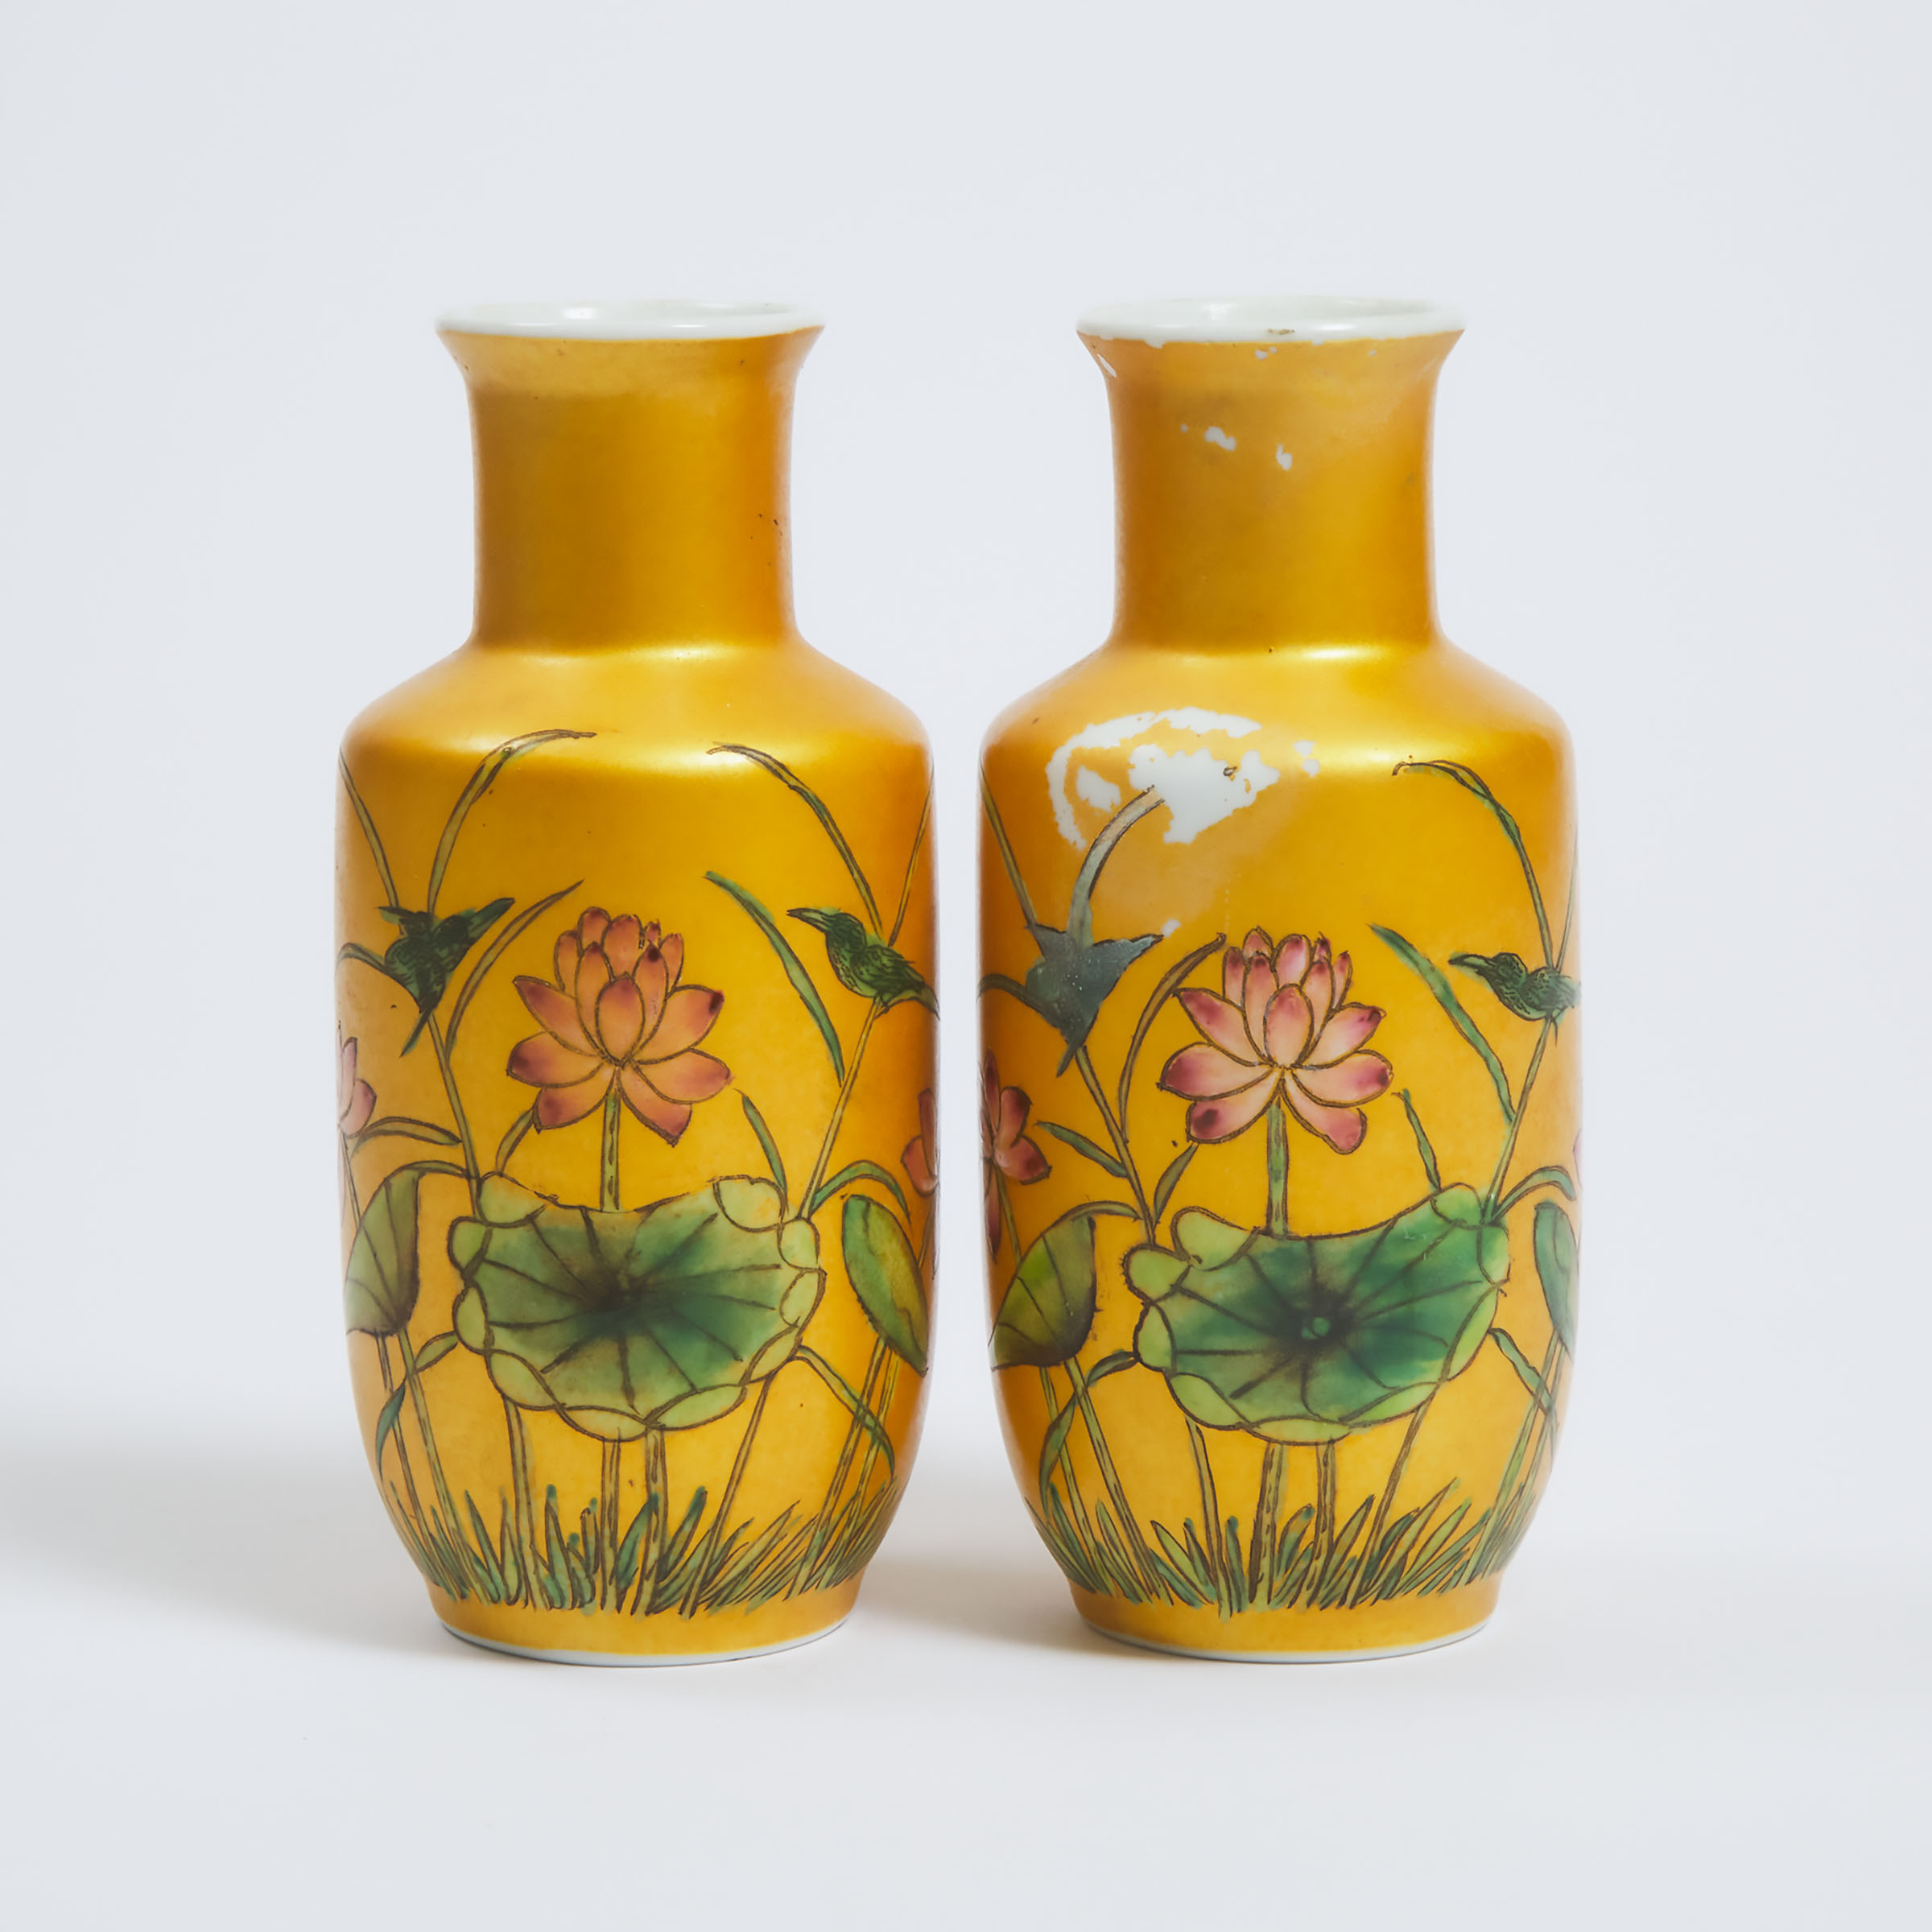 A Pair of Famille Rose Gold-Ground Rouleau Vases, Juren Tang Mark